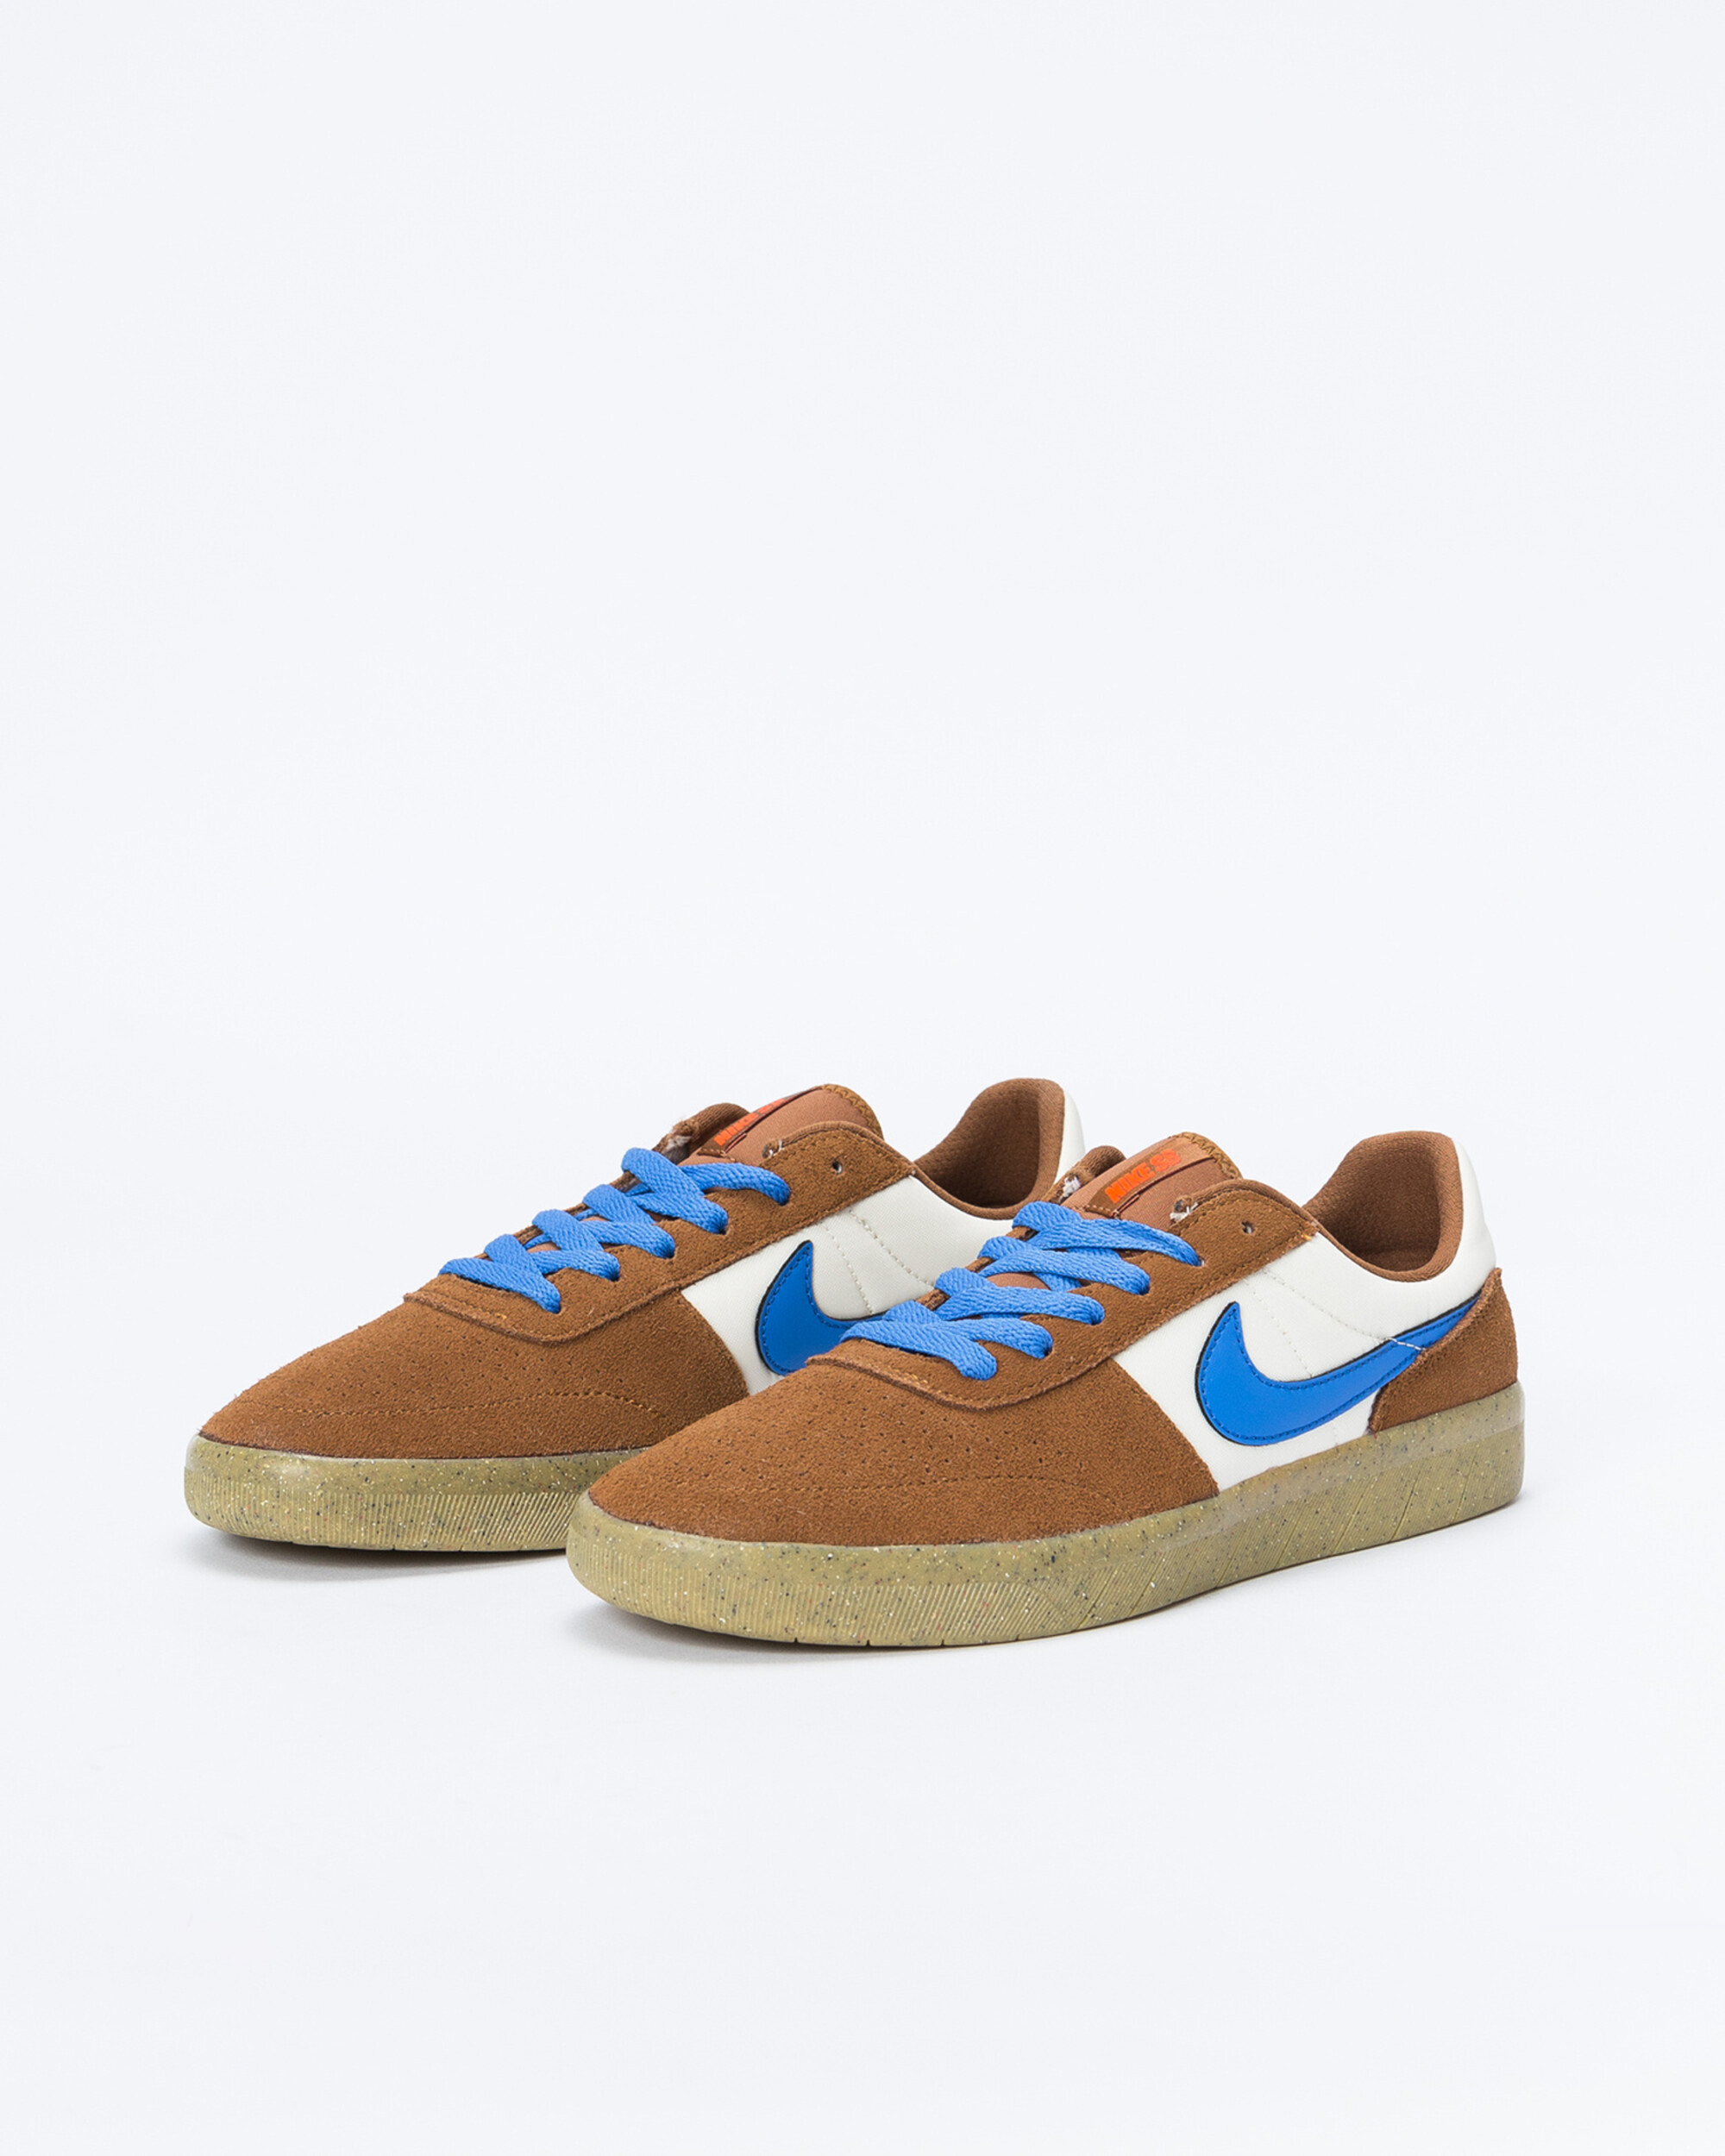 Nike Sb Team Classic Core Perforated Lt British Tan/Pacific Blue-Pale Ivory